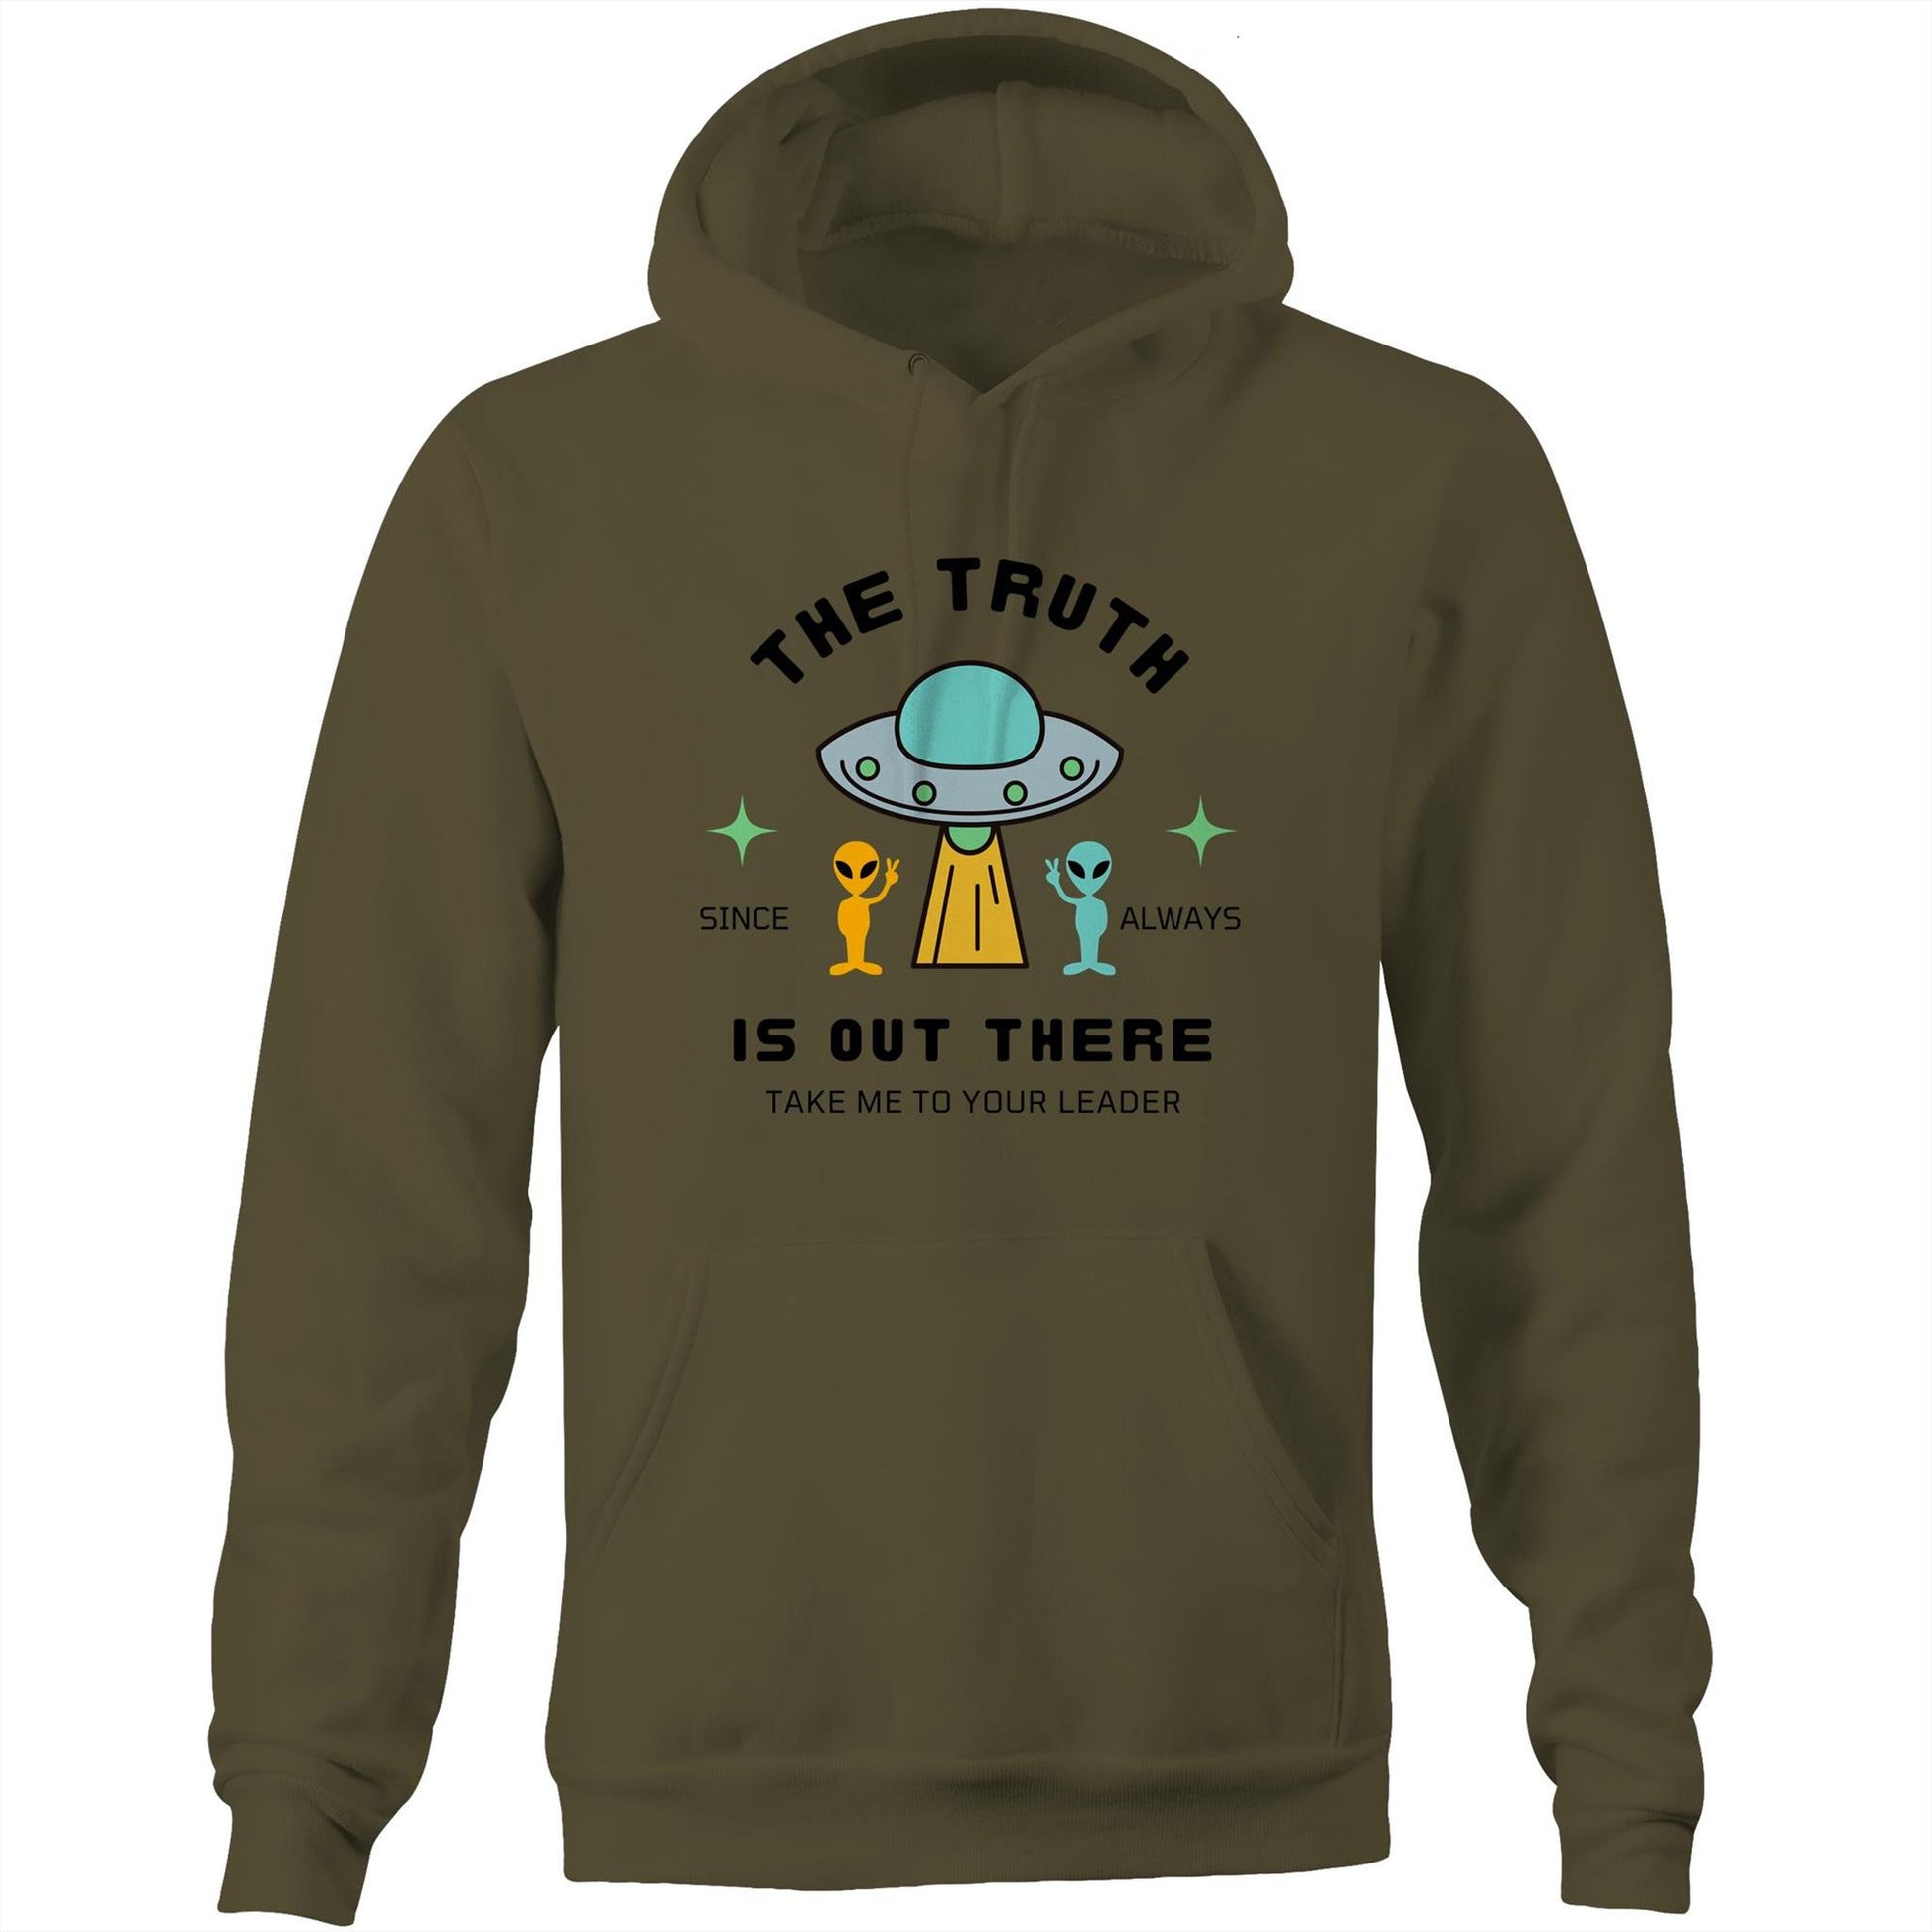 The Truth Is Out There - Pocket Hoodie Sweatshirt Army Hoodie Sci Fi